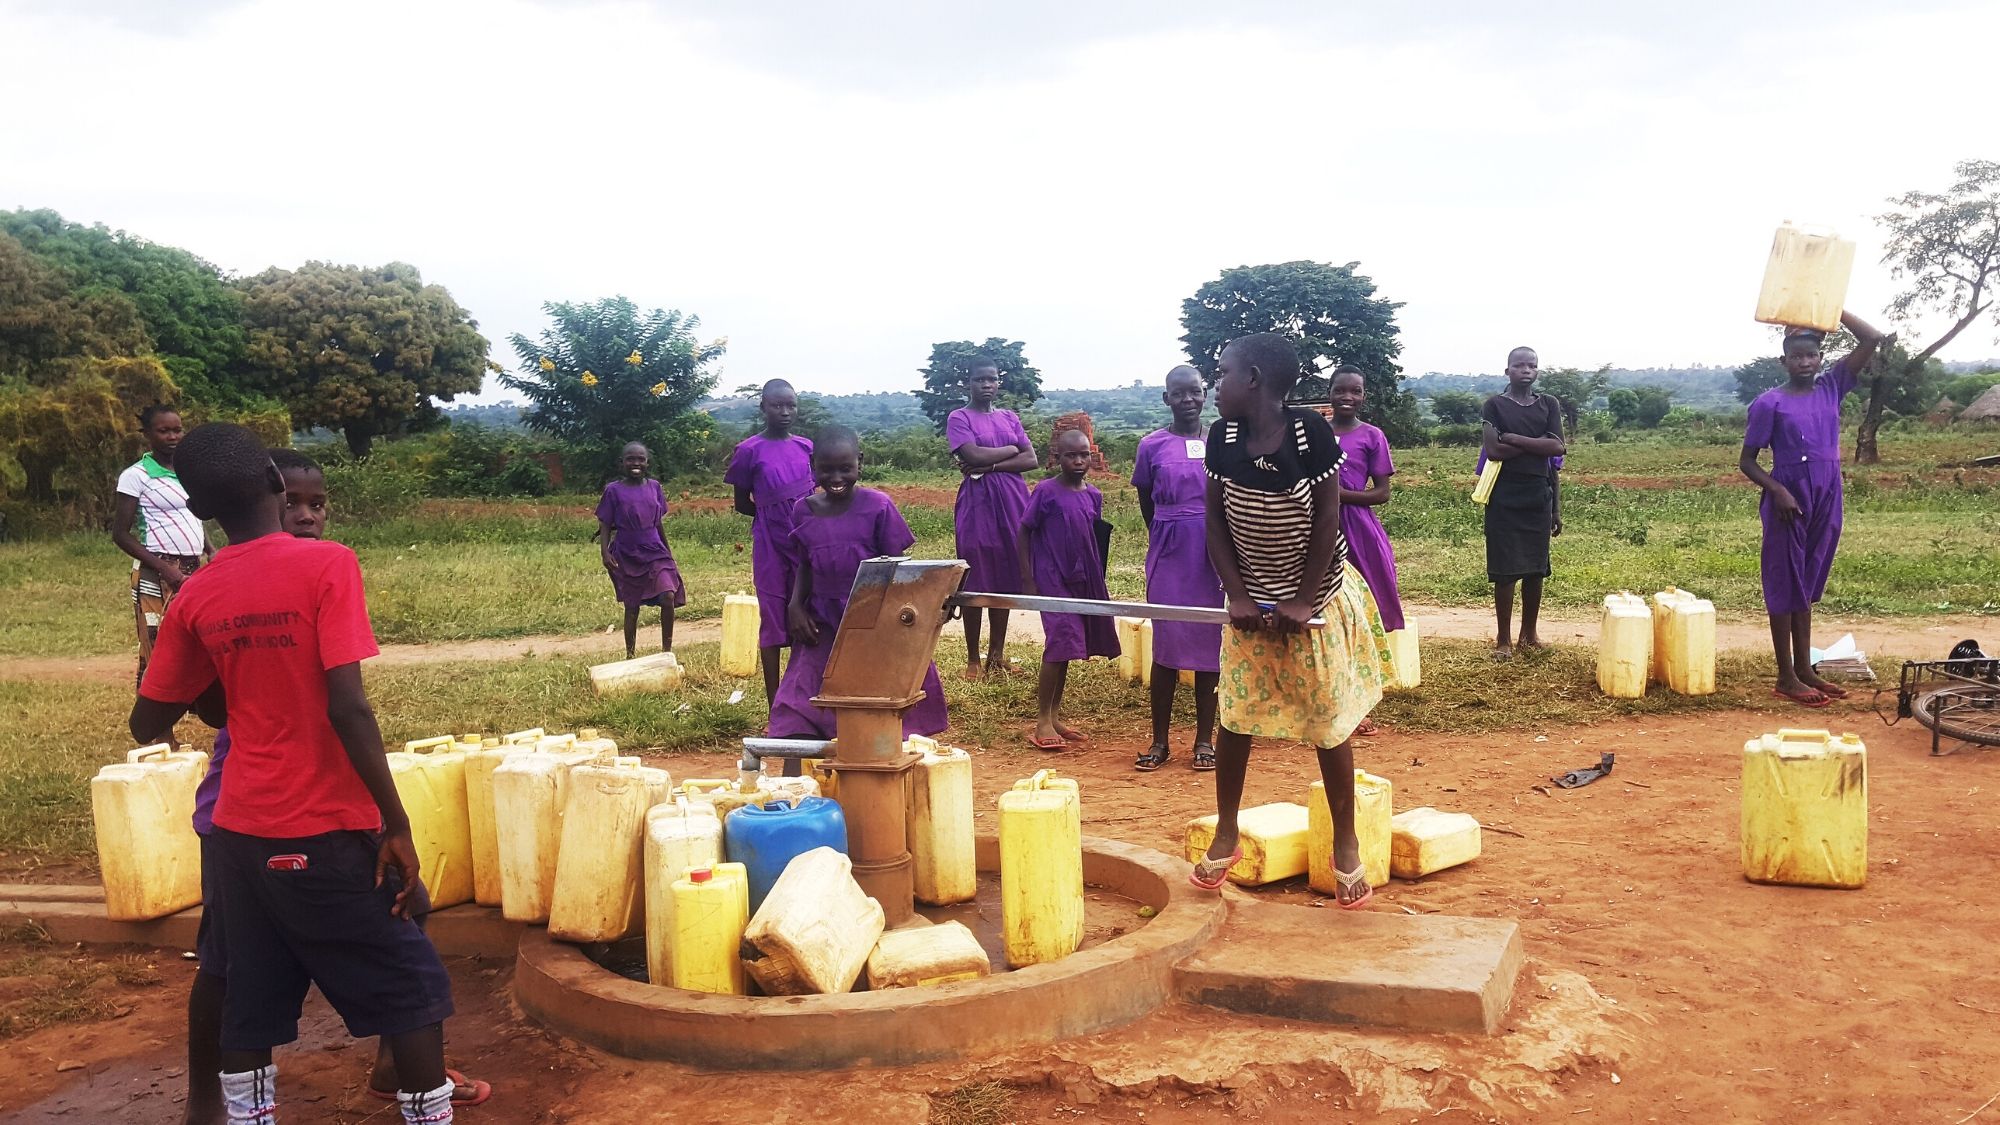 People using a handpump for water in Uganda, with containers lined up to fill with water.